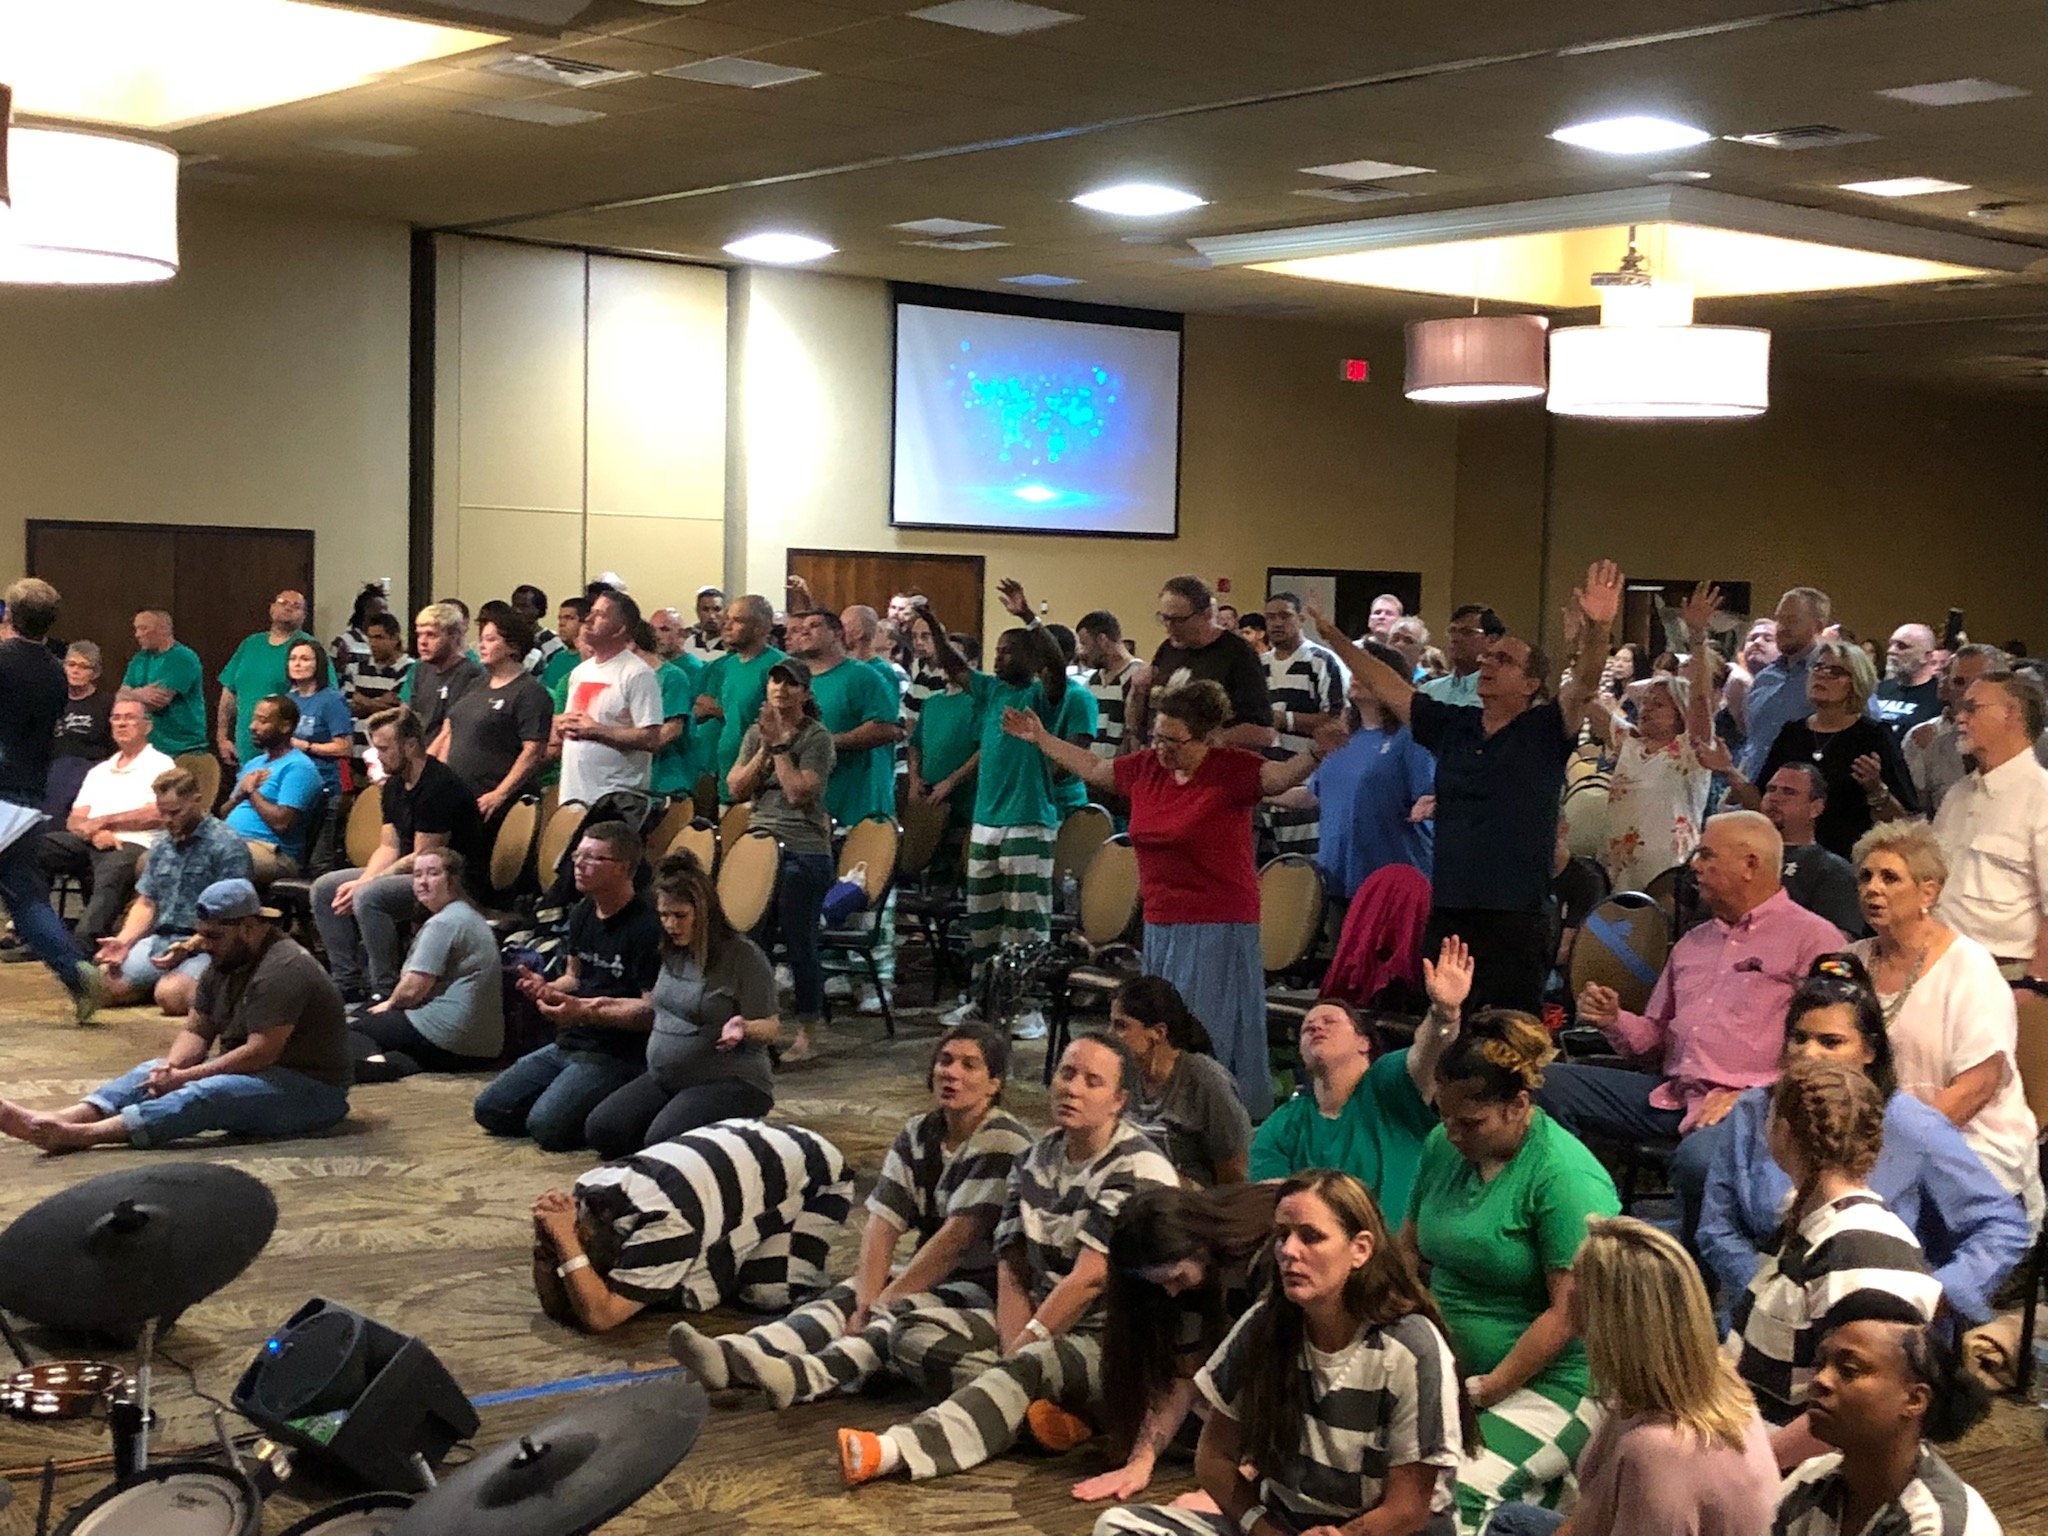 Recent photos from the church services in Hopkins County, Texas. The prisoners are in striped uniforms.